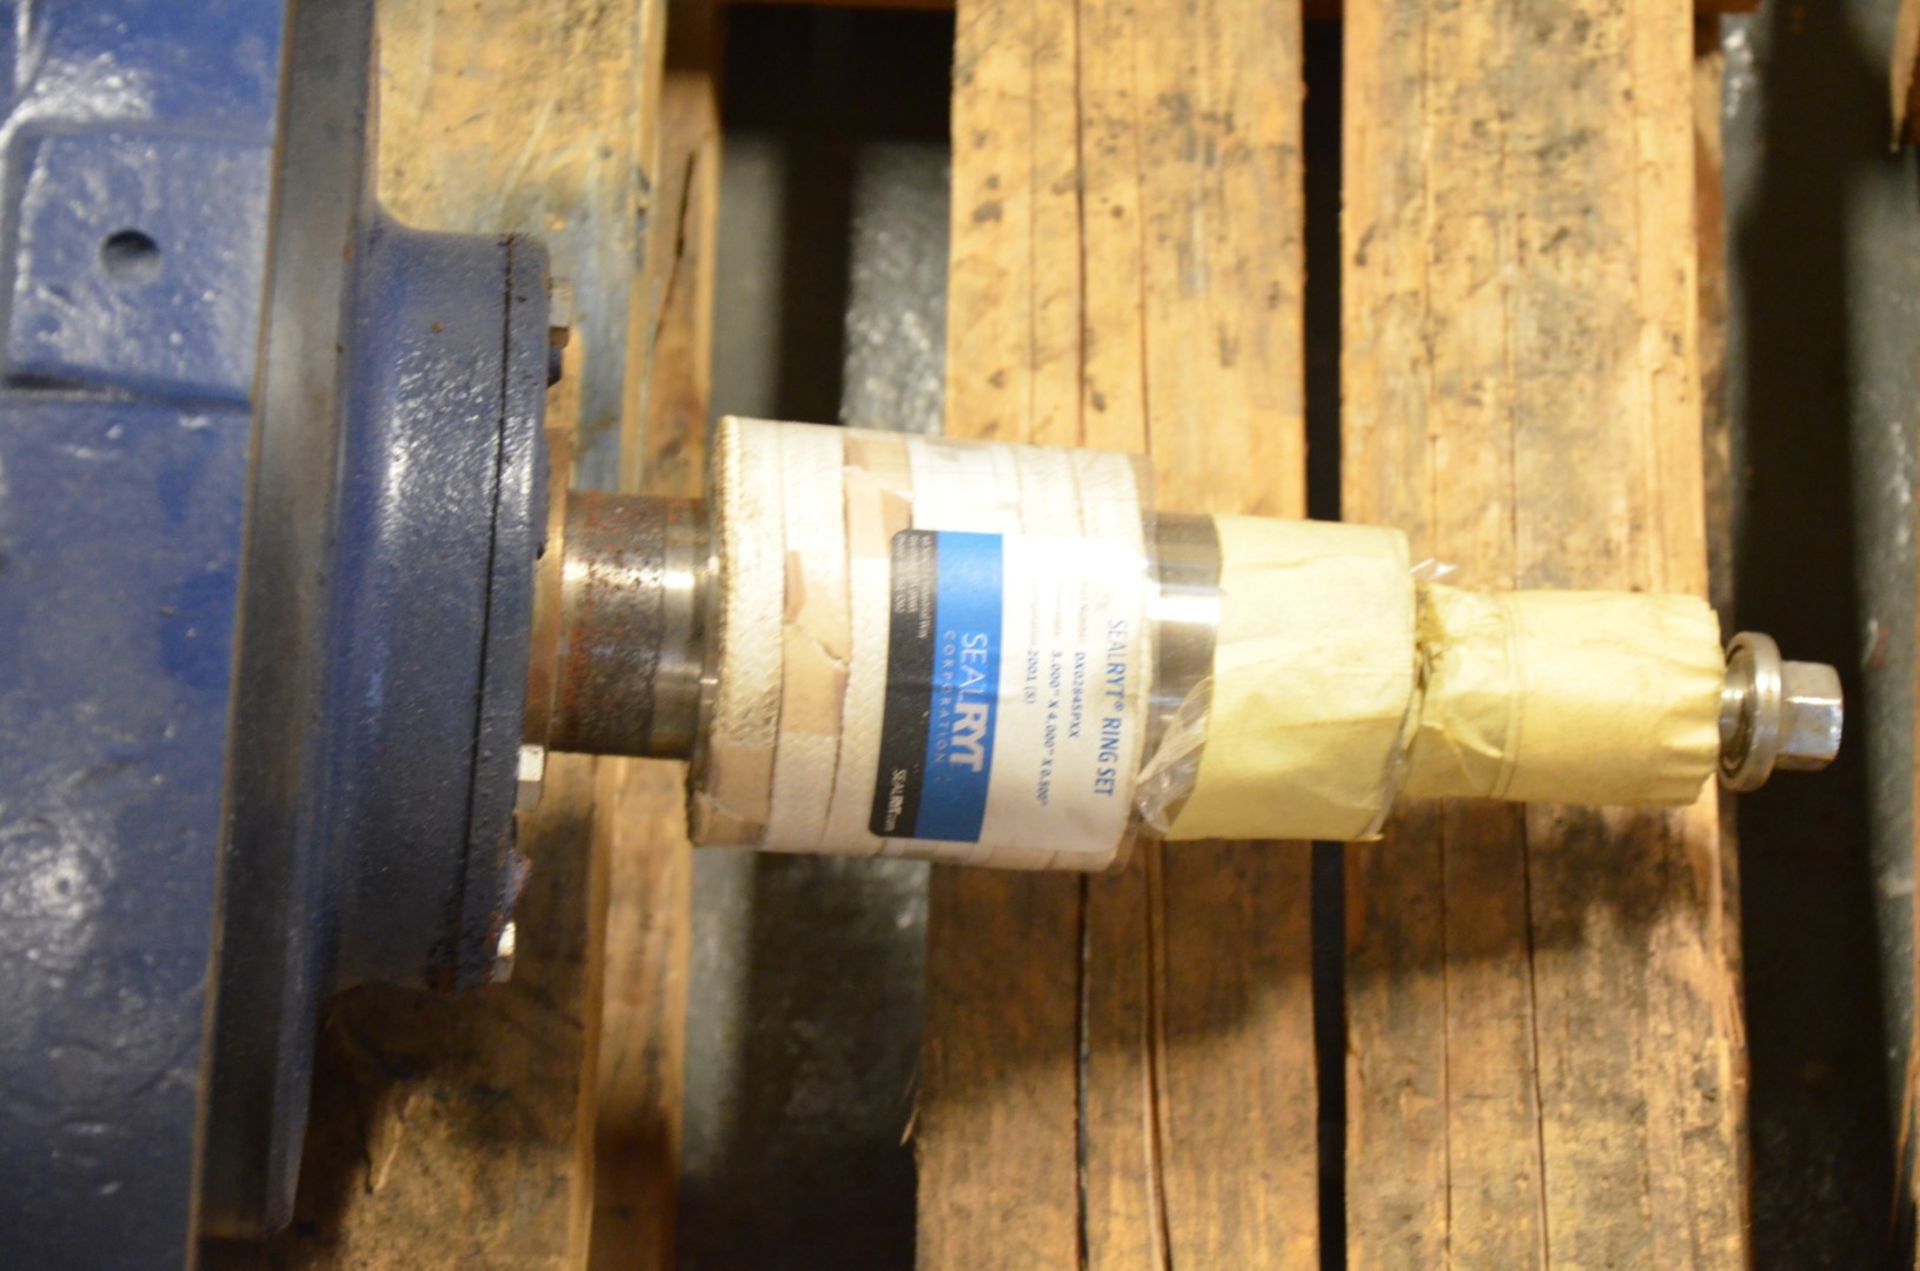 GOULDS 6313D PUMP ROTARY ASSY [RIGGING FEE FOR LOT #1452 - $25 USD PLUS APPLICABLE TAXES] - Image 3 of 3